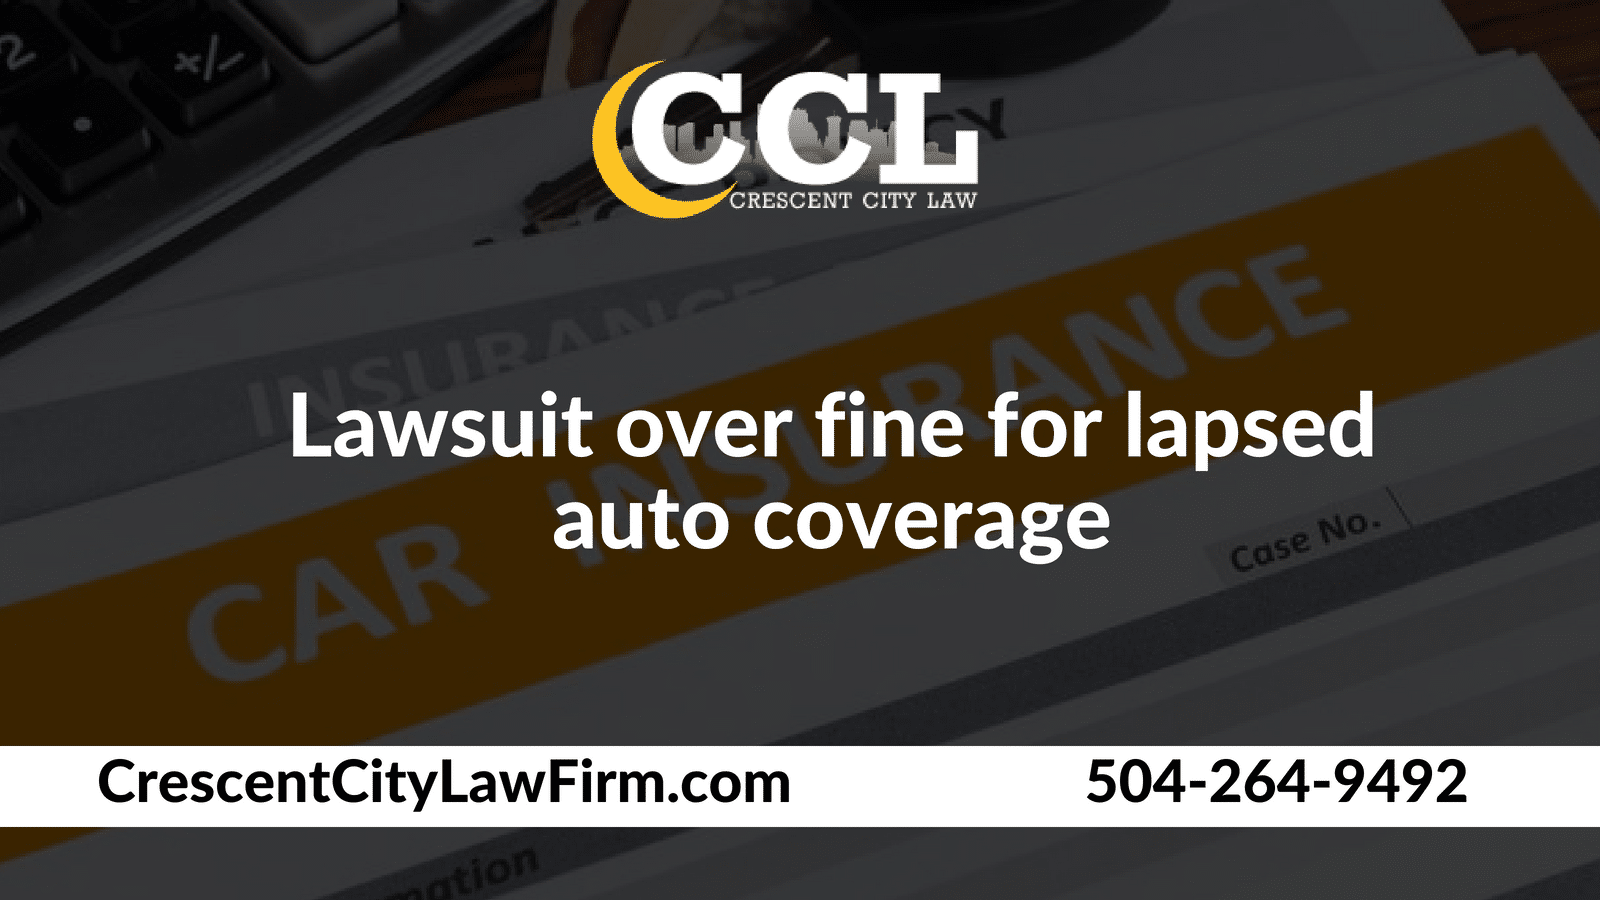 Lawsuit over fine for lapsed auto coverage | Crescent City Law